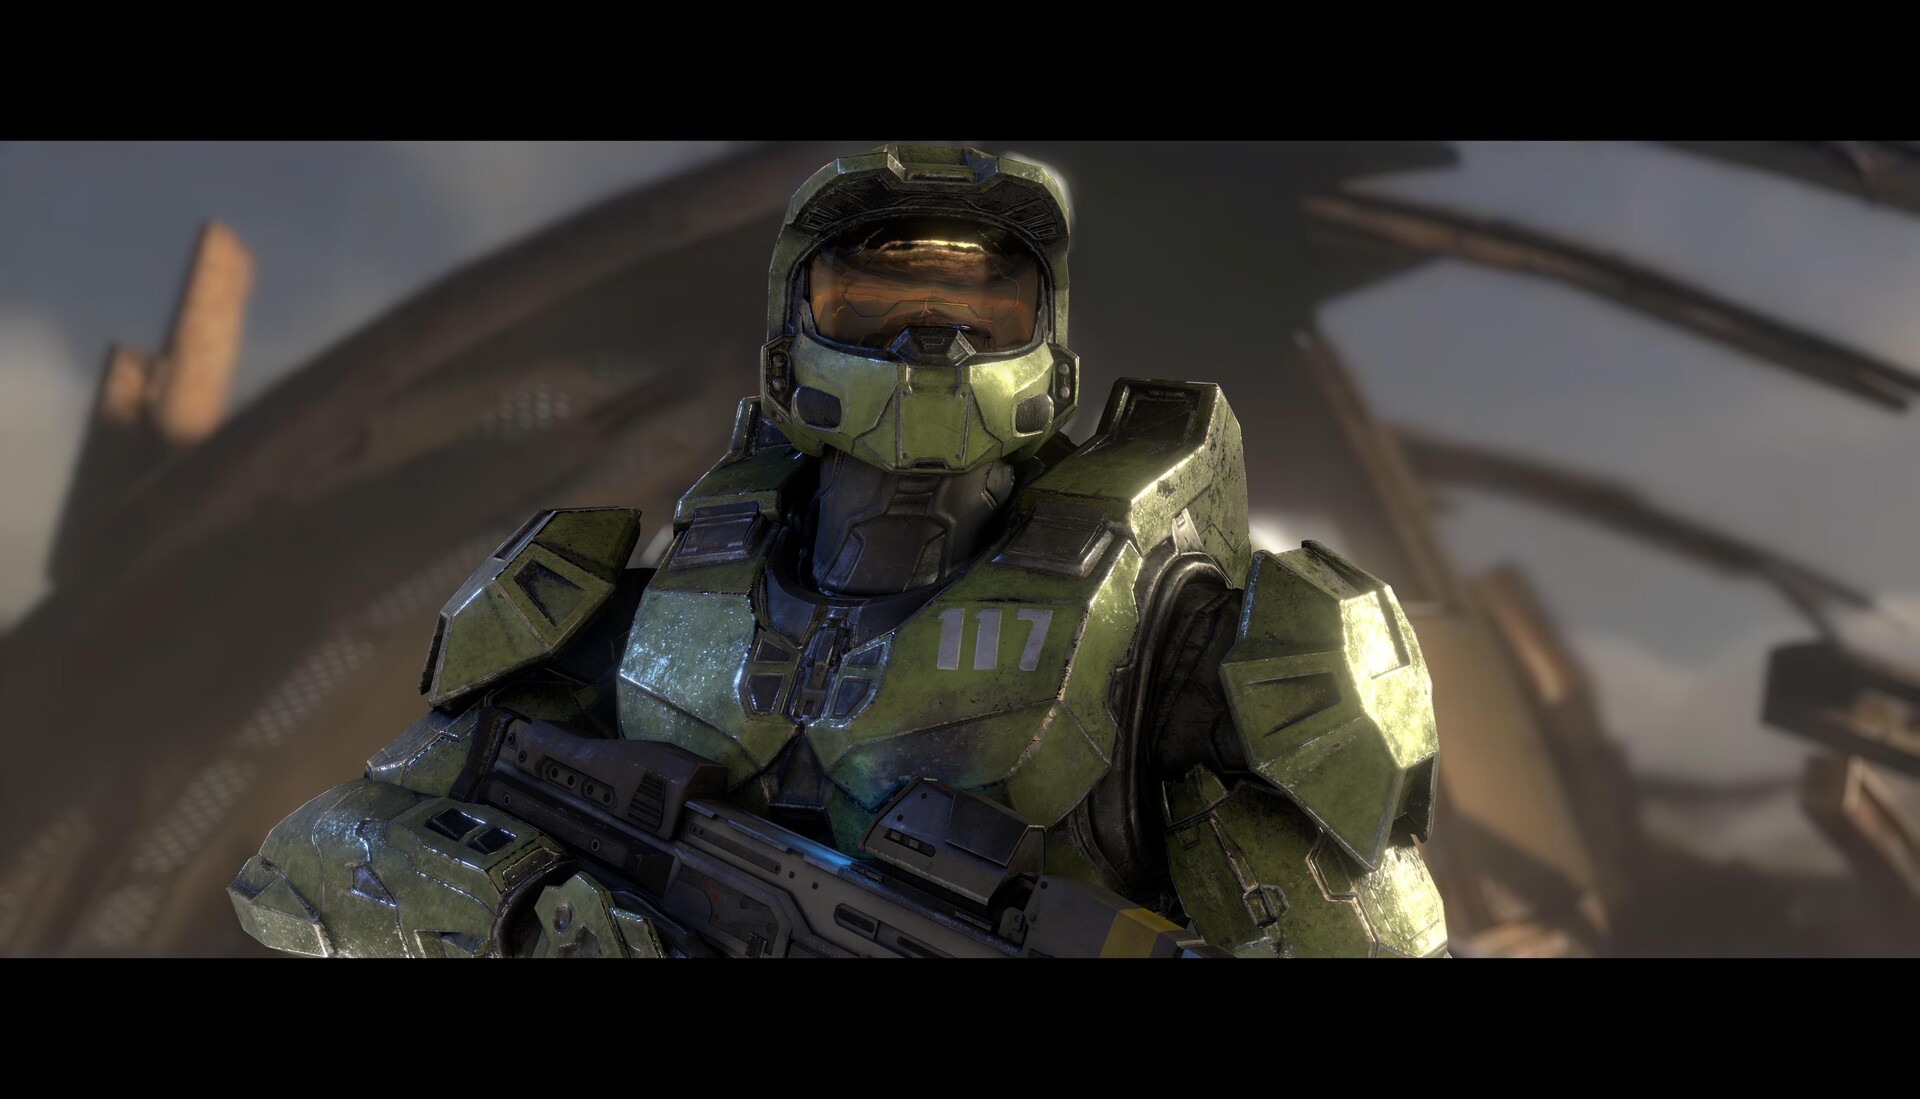 Glitch5970 2 Halo 3 2006 Trailer Shot Replaced With Infinite Chief